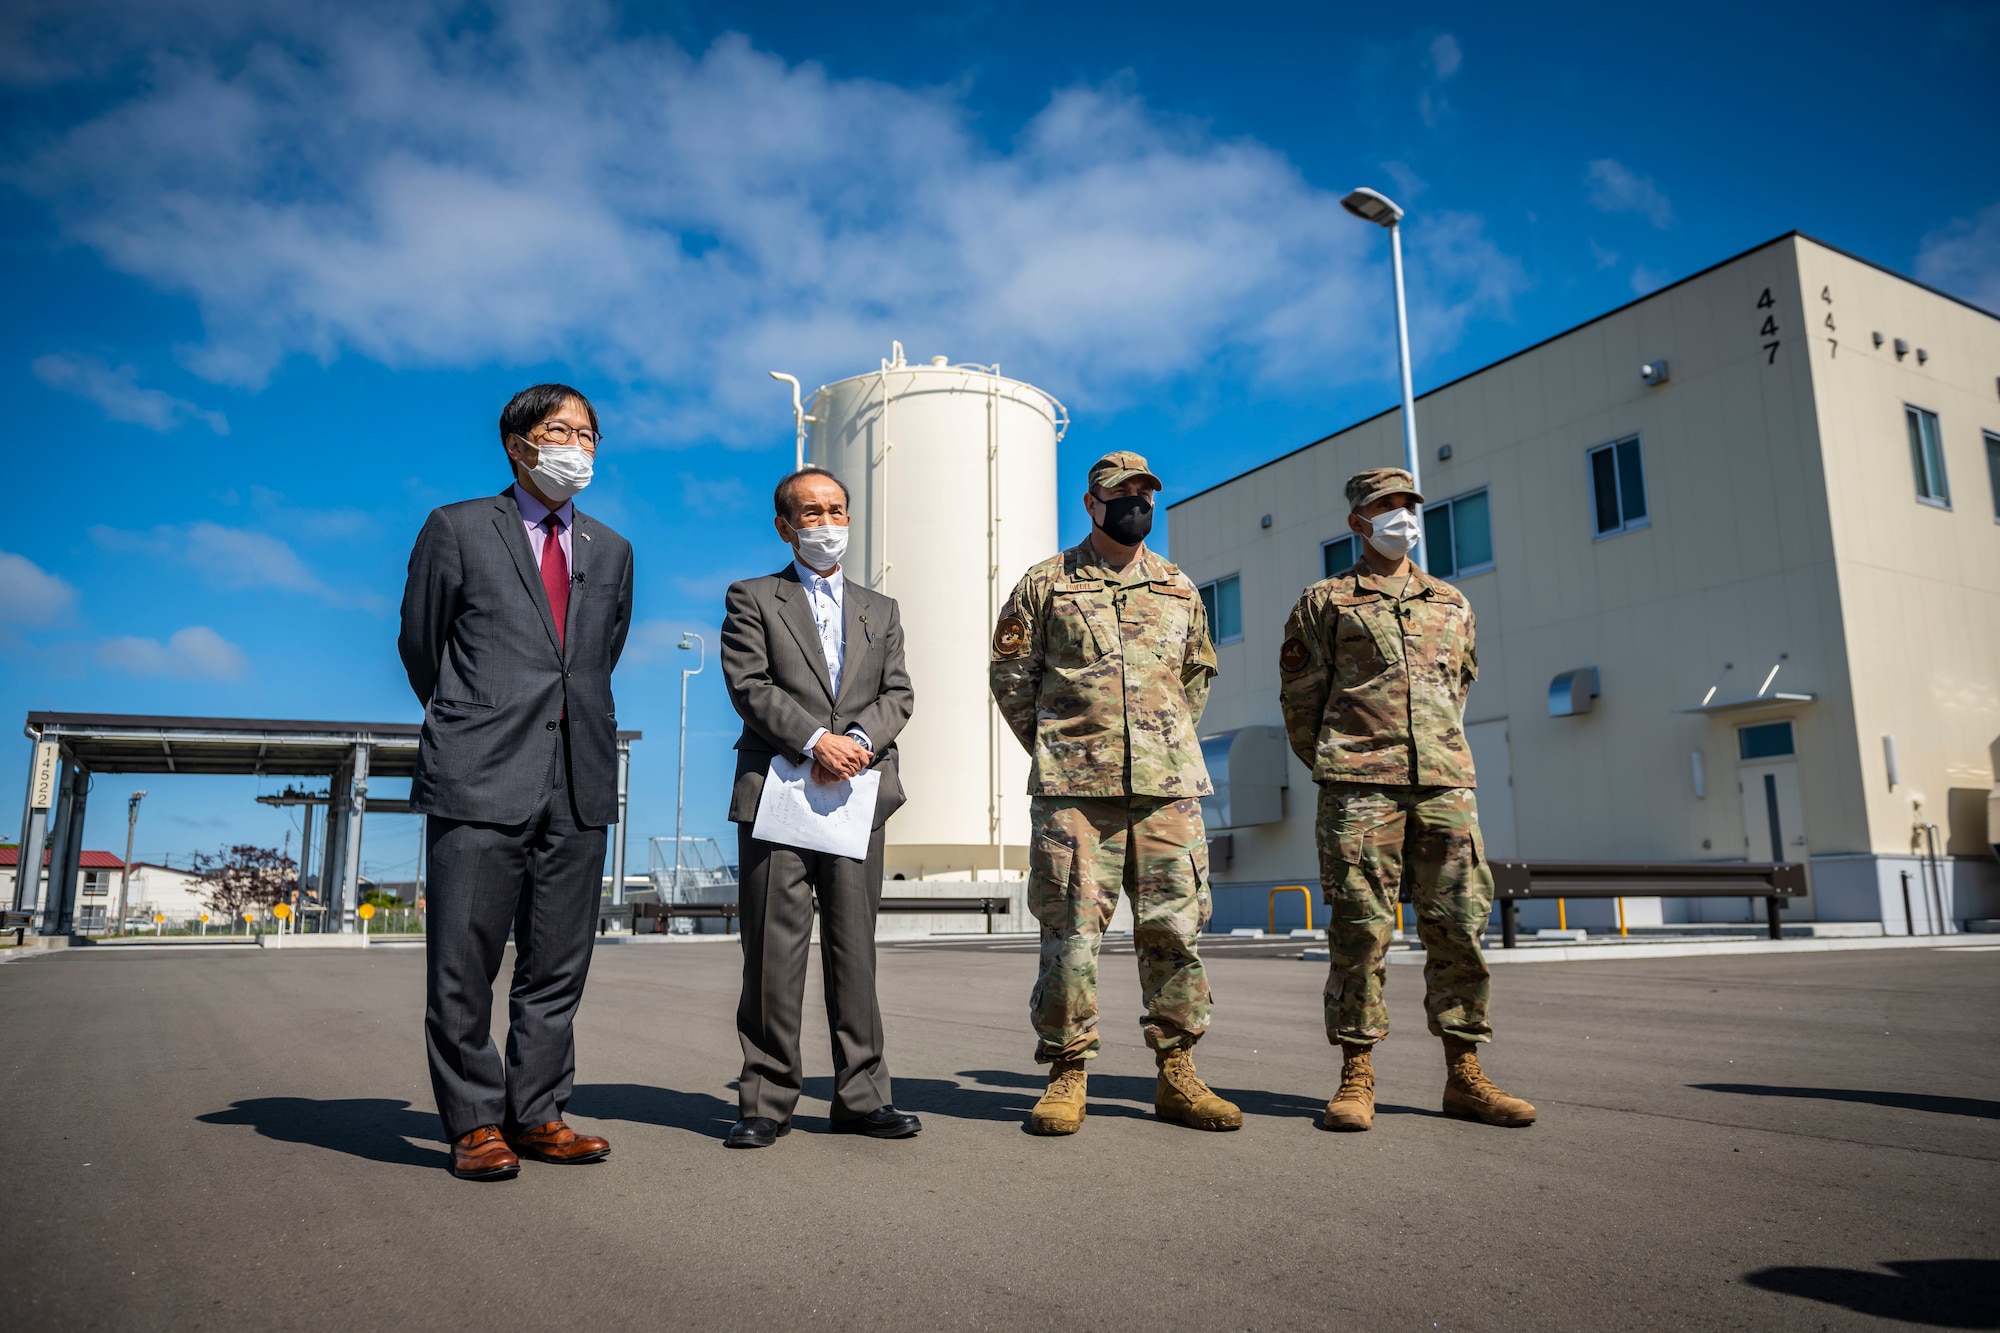 military members in uniform and members in suits stand in front of a gas plant.